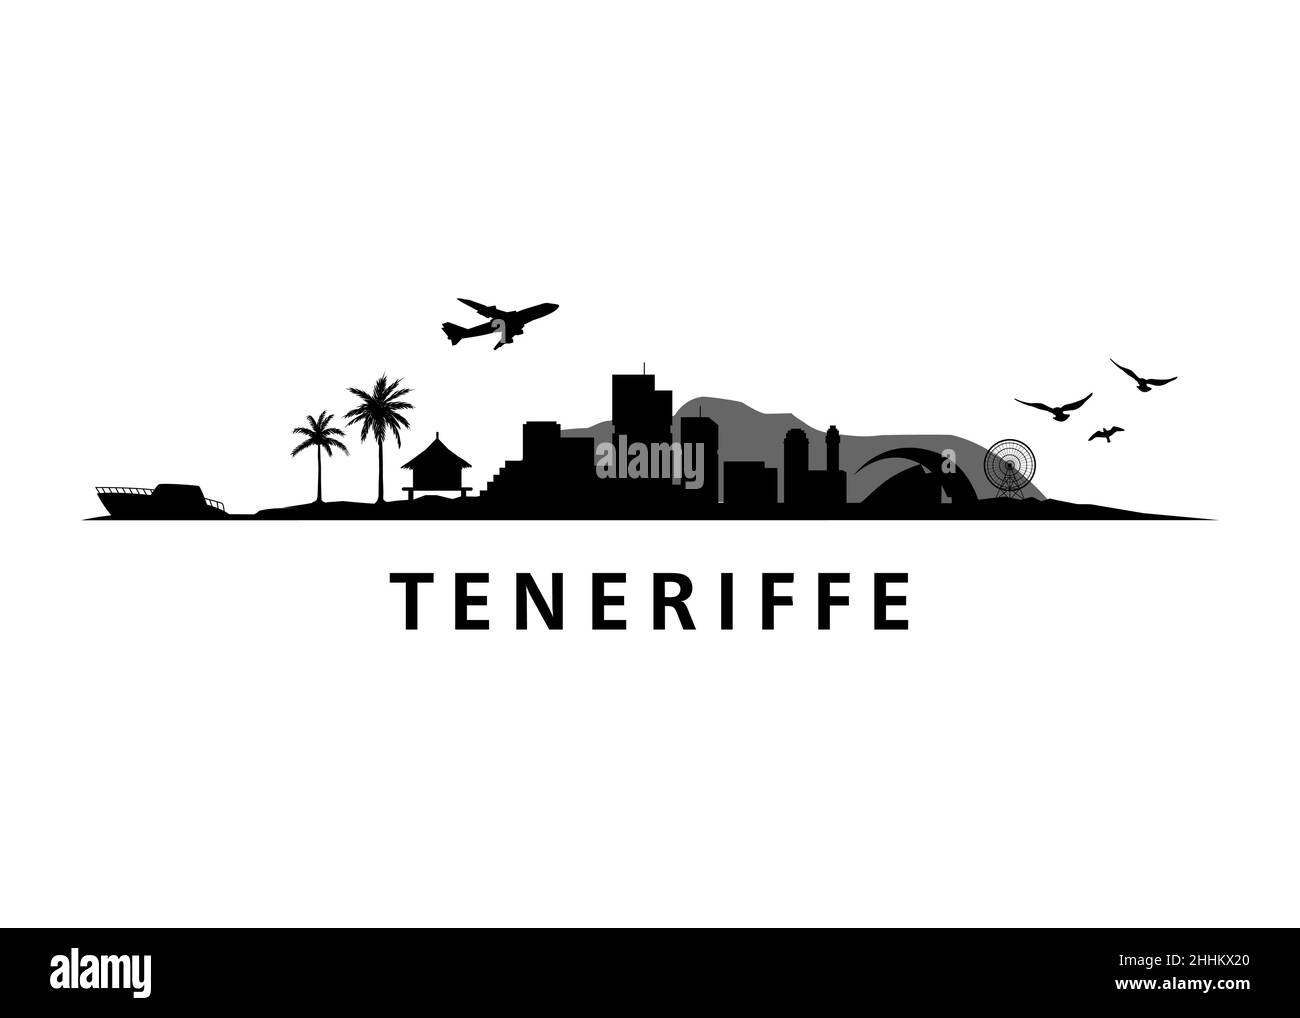 Teneriffe Tropical Exotic Island in Spain Landscape Skyline Vector Silhouette Stock Vector